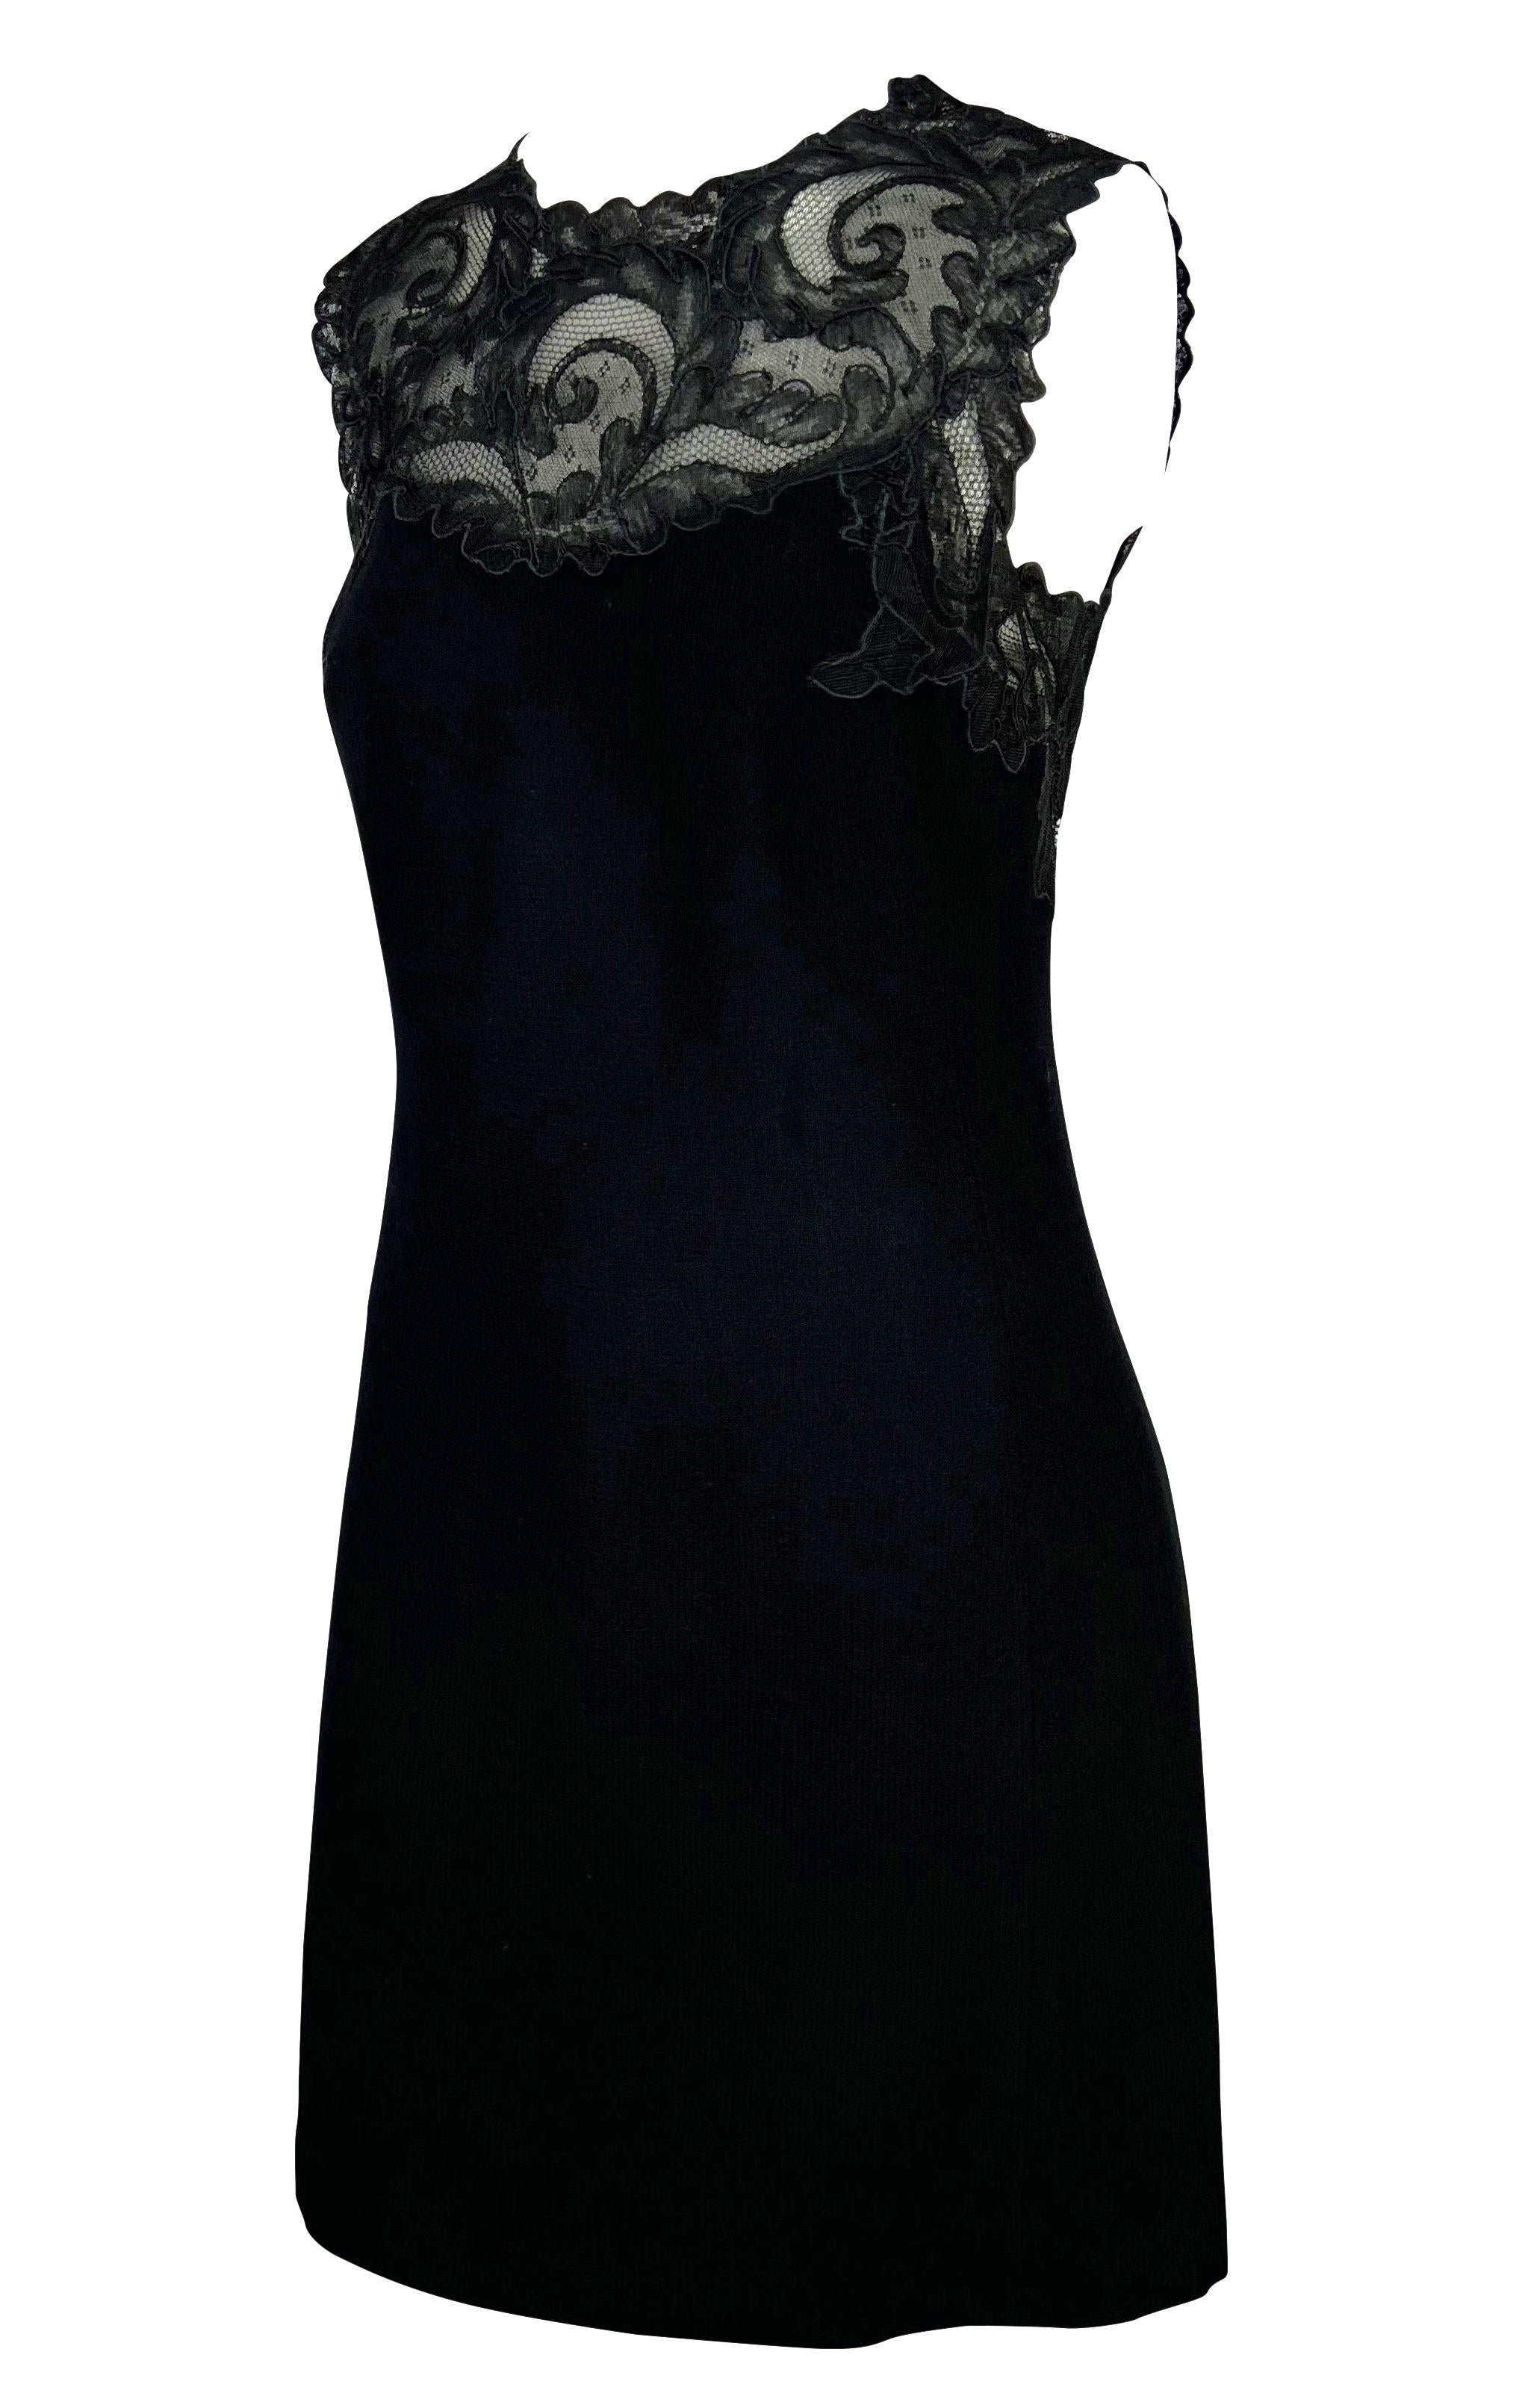 Presenting a fabulous black lace Gianni Versace Couture dress designed by Gianni Versace. From the Fall/Winter 1996 collection, this beautiful sleeveless wool stretch dress is made complete with intricate lace above the bust. Add this gorgeous